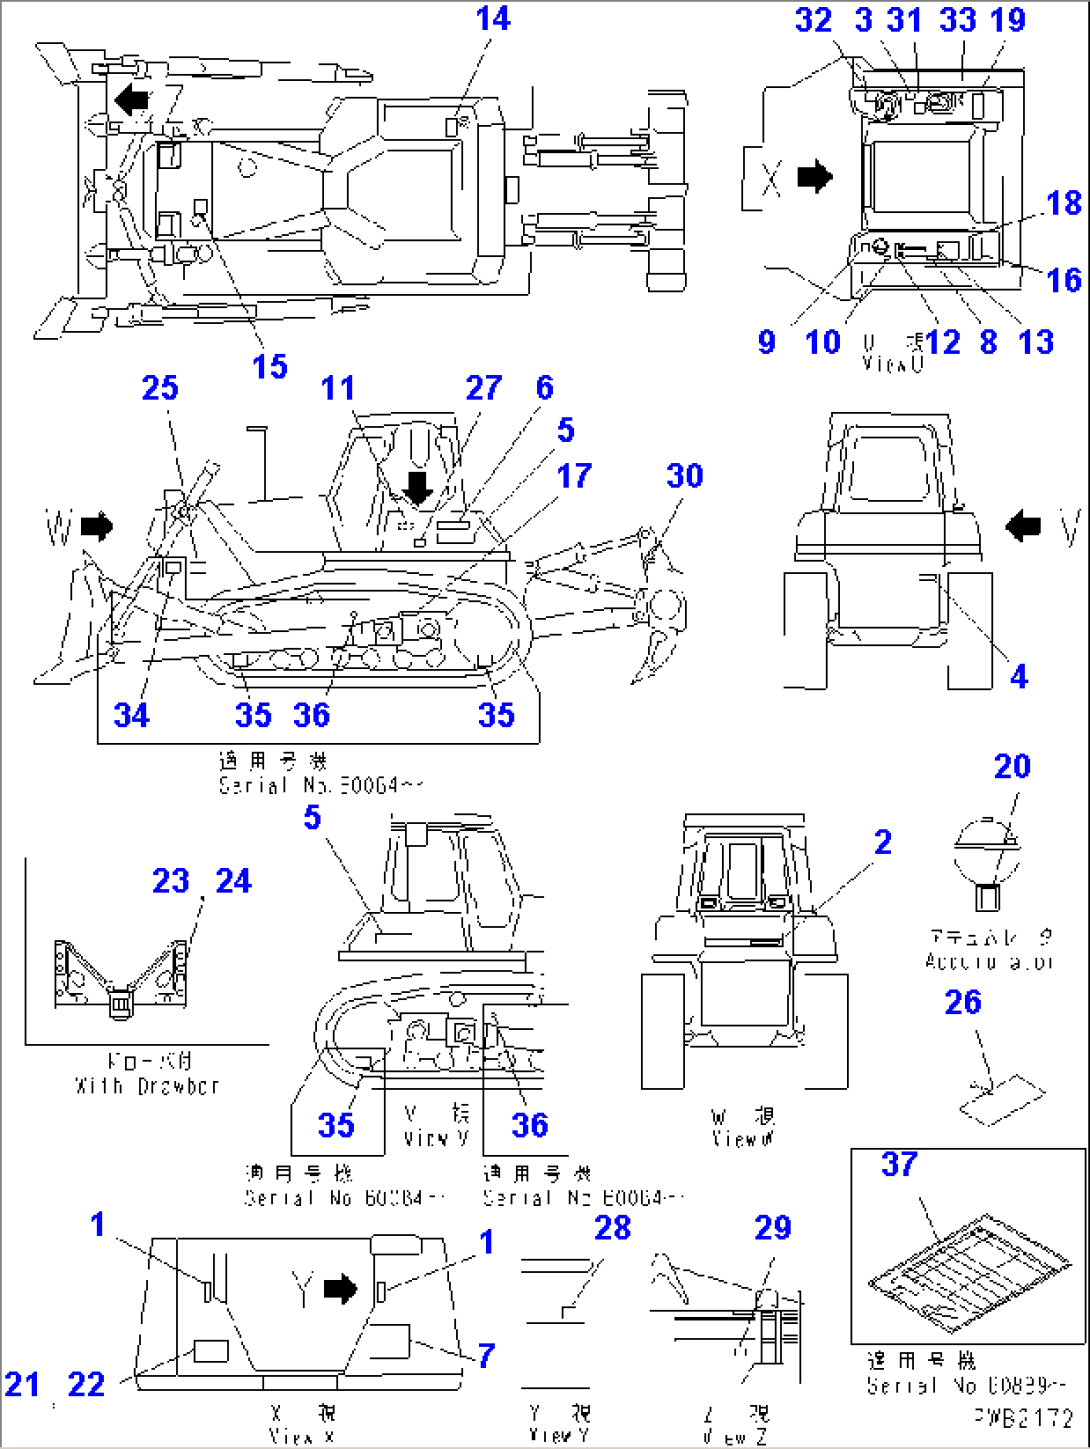 MARKS AND PLATES (SPANISH EC SPEC.)